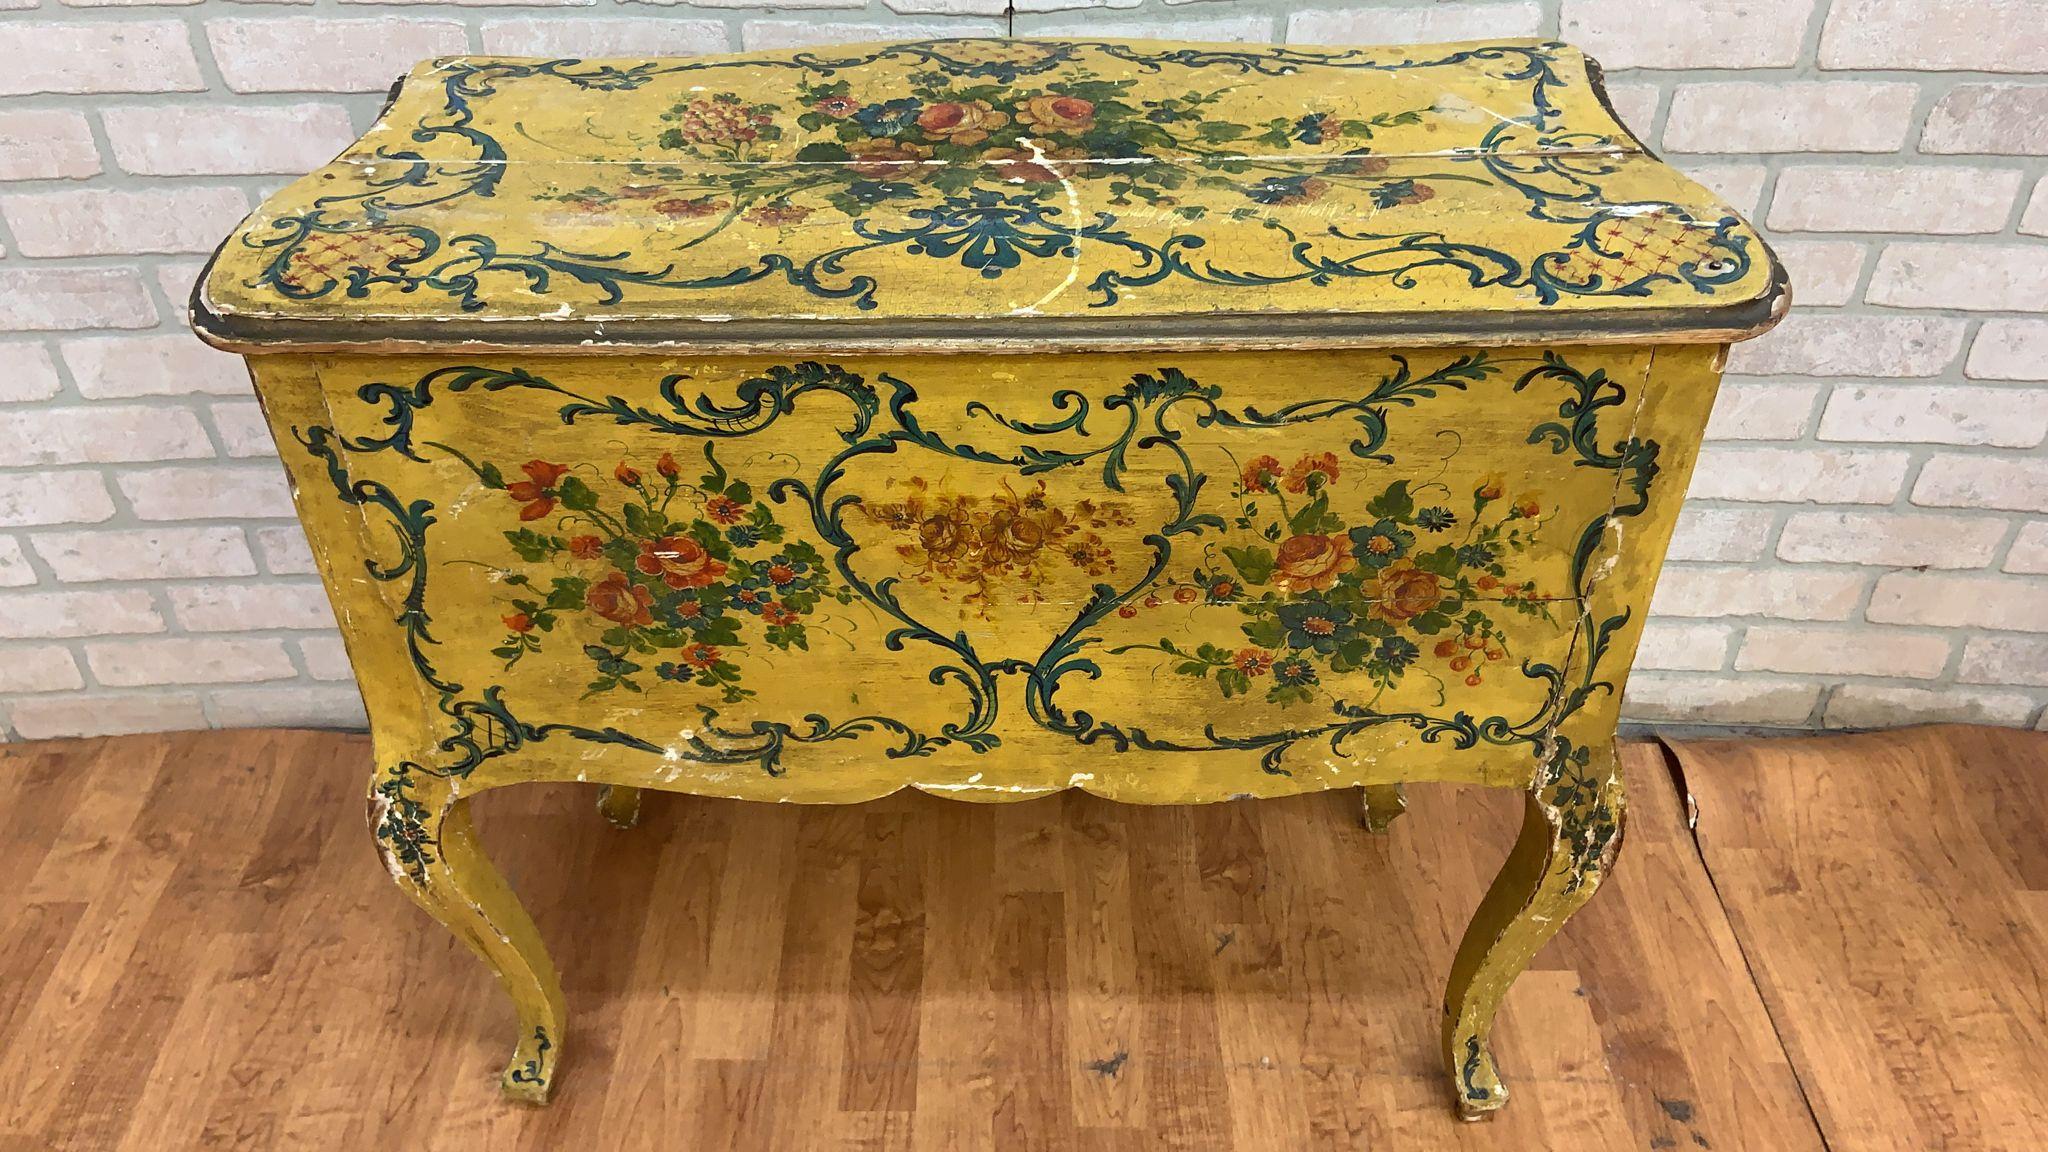 Antique Rococo Style Venetian Hand Painted Vanity Desk & Side Tables, Set of 3 For Sale 11